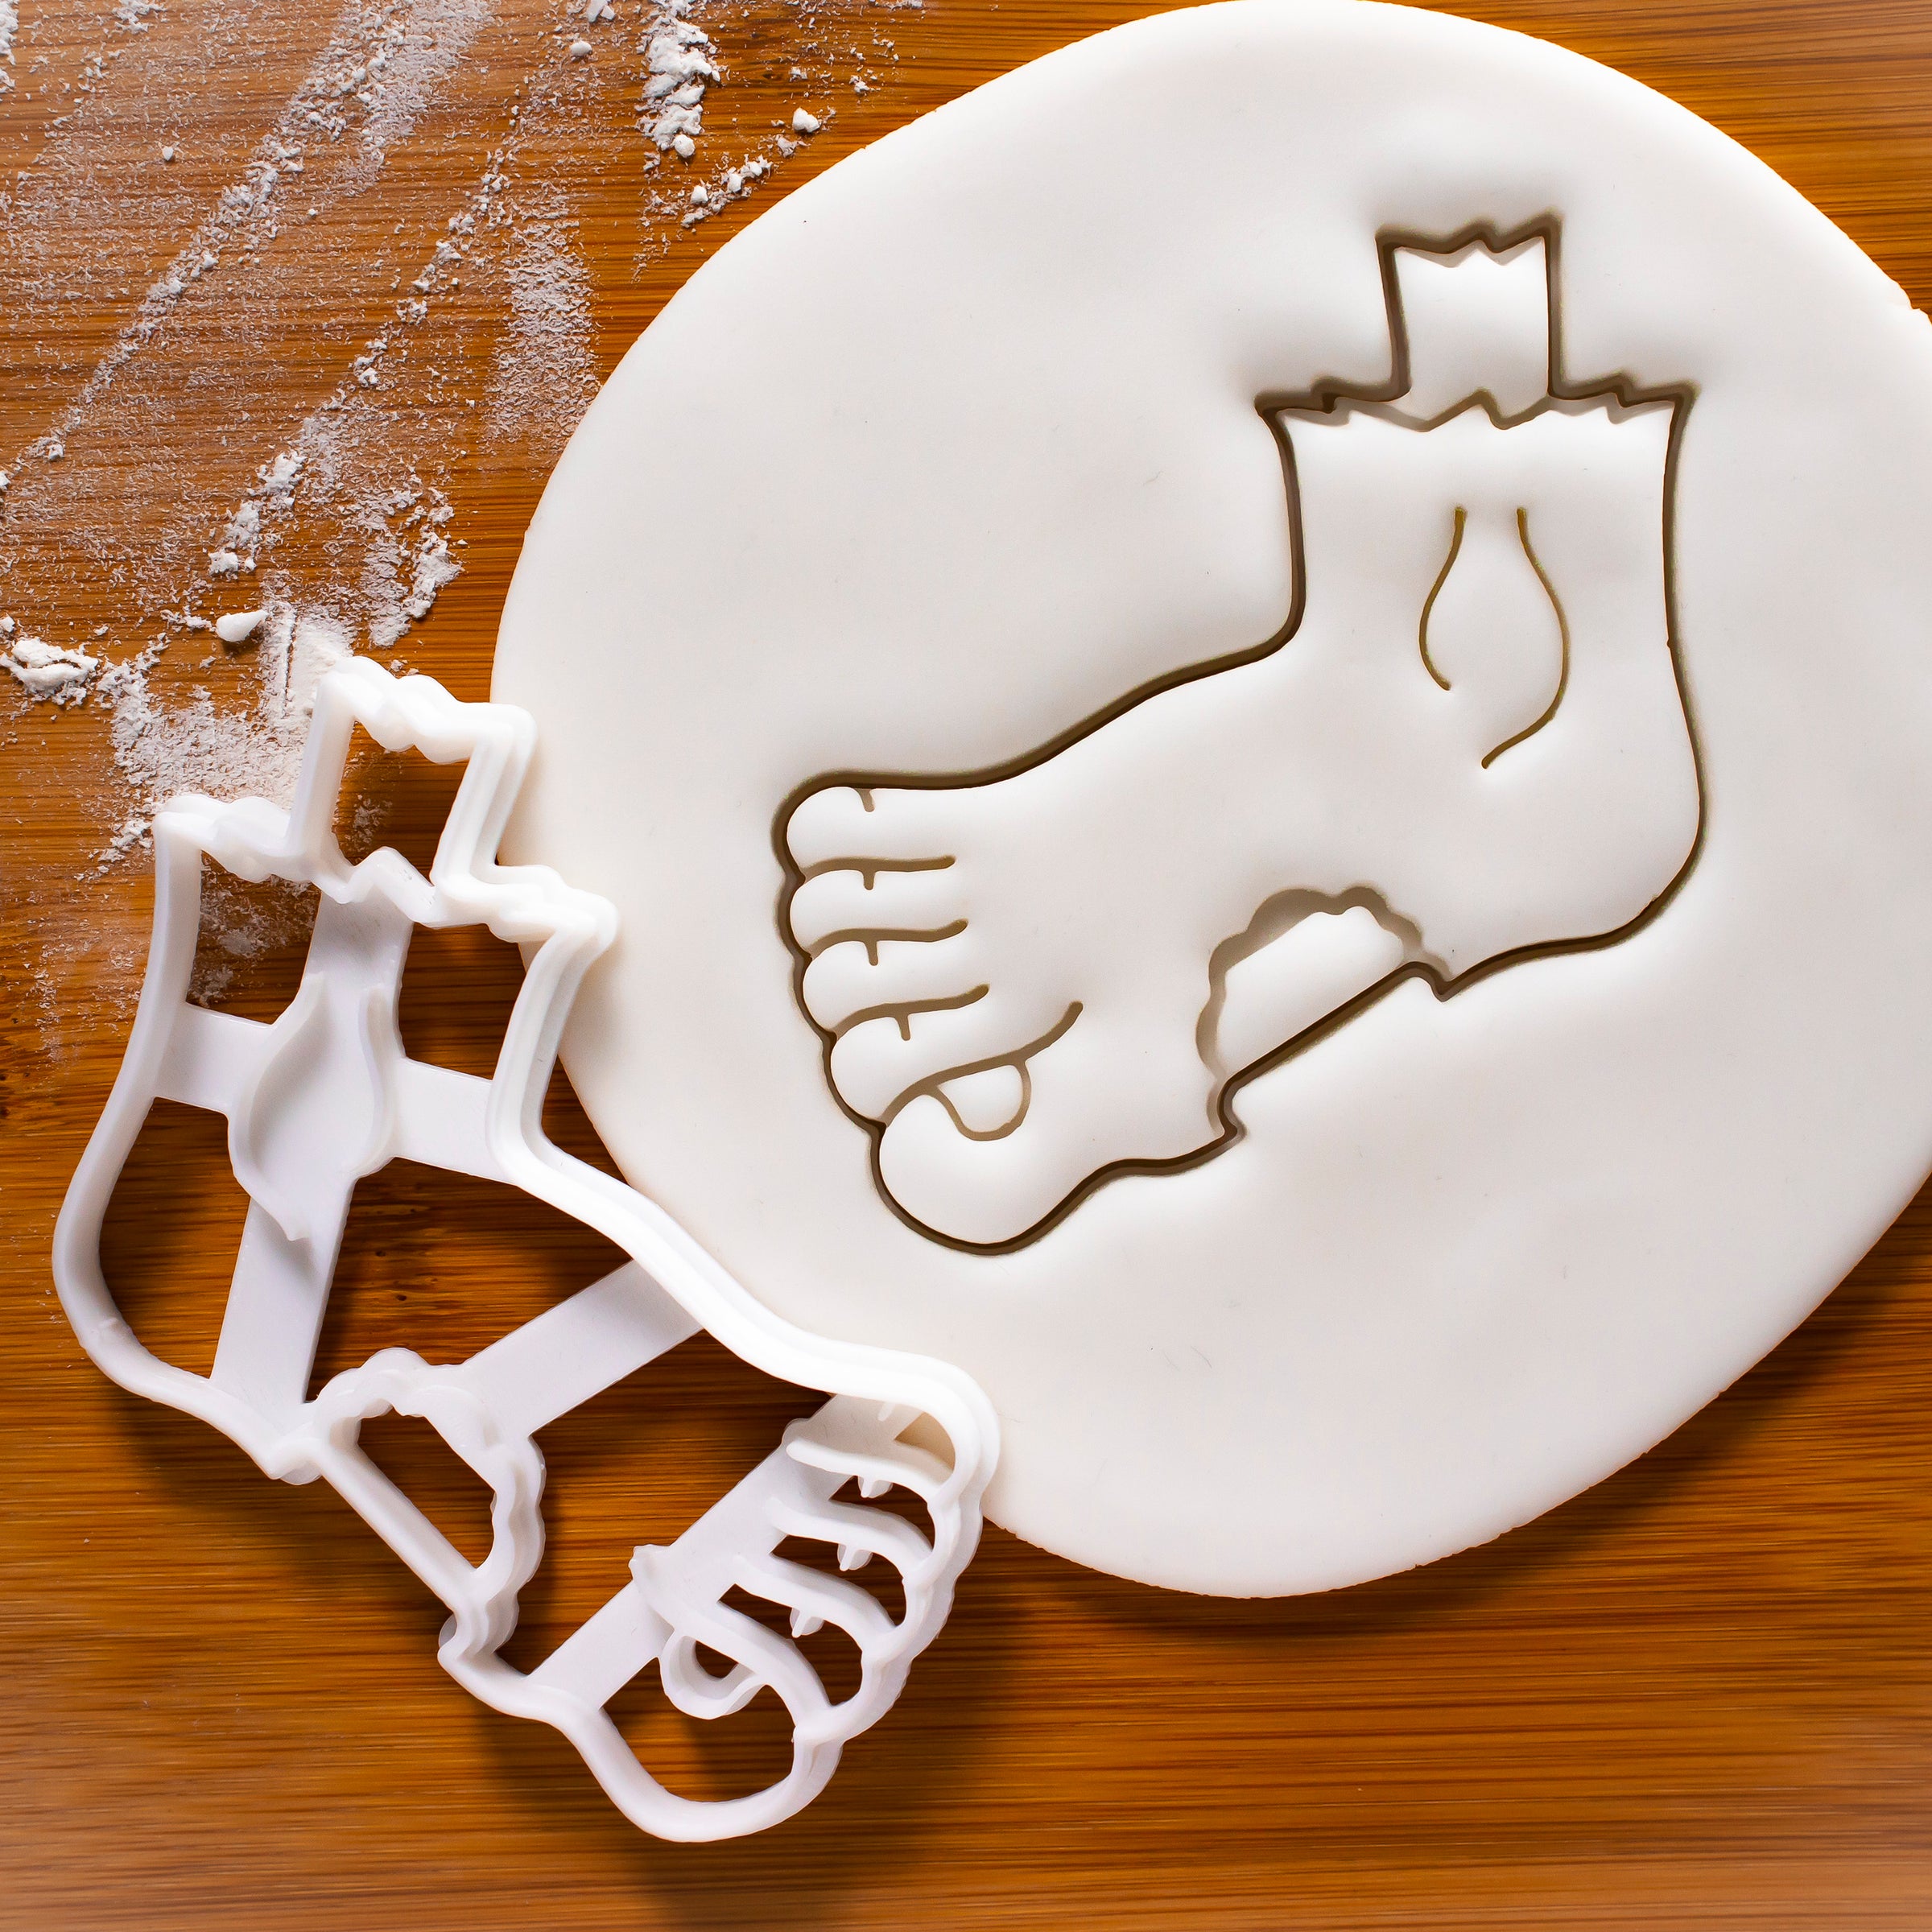 Zombie Foot Cookie Cutter